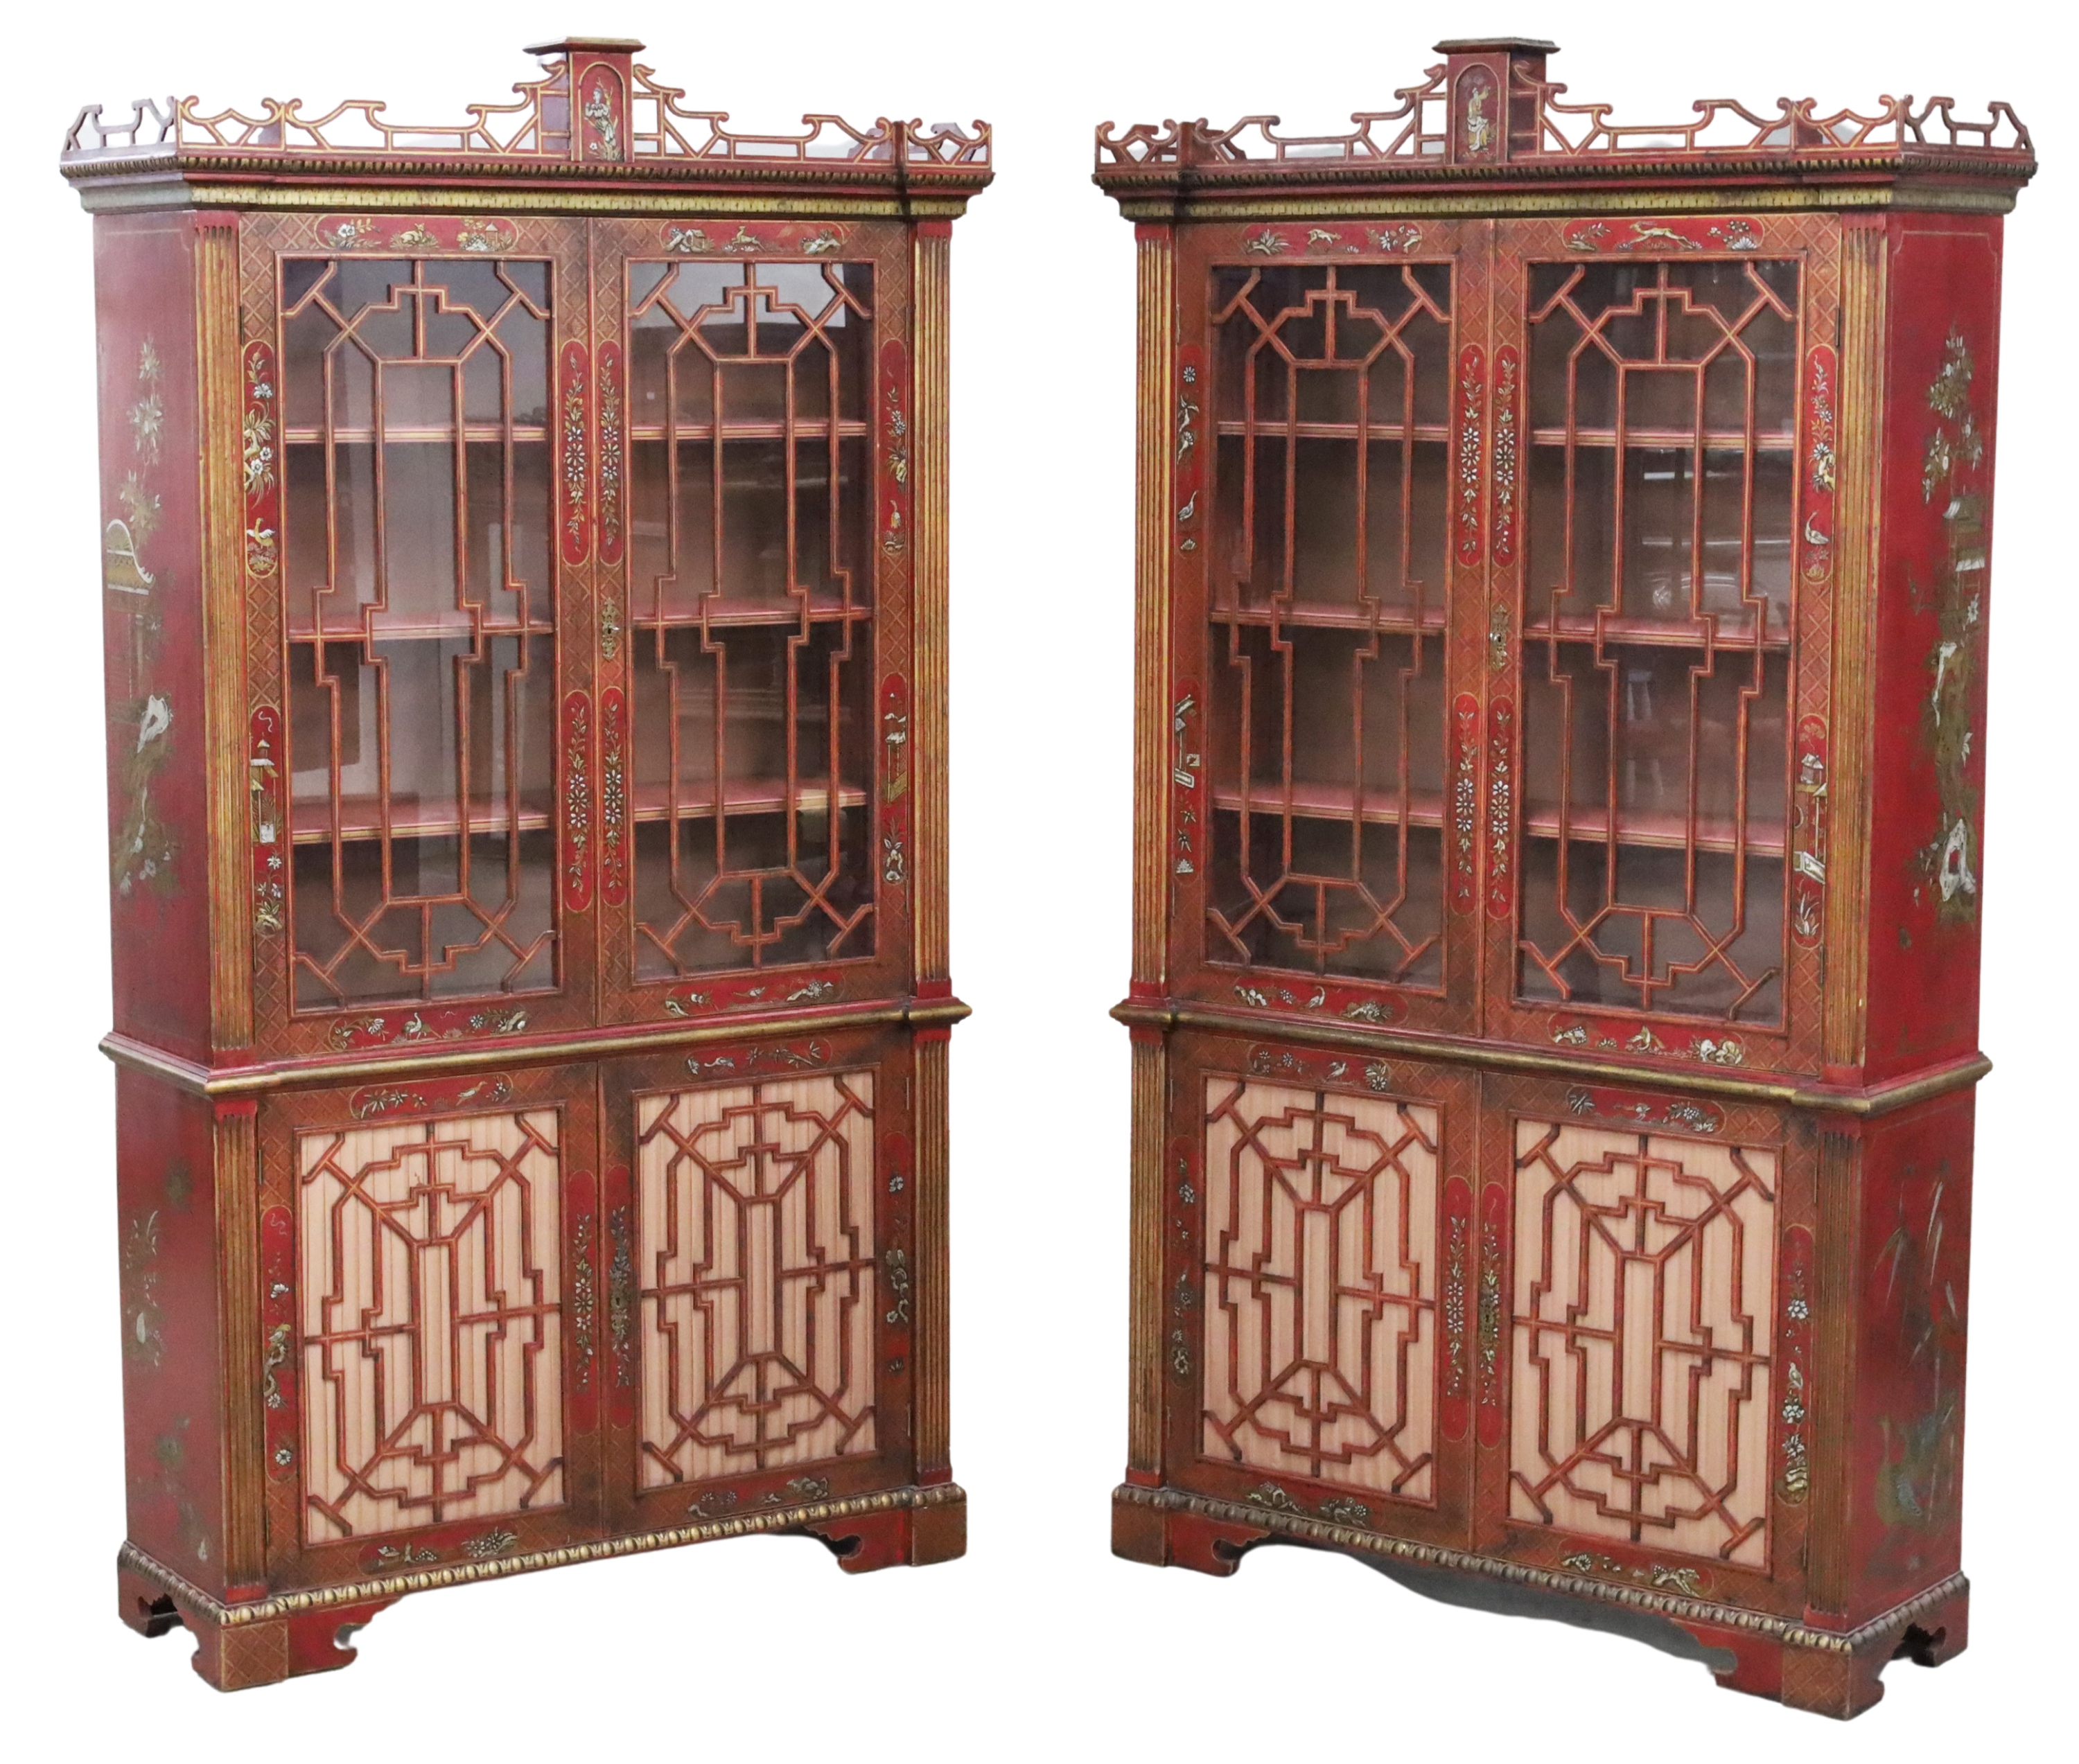 PAIR OF ENGLISH CHINOISERIE BOOKCASES 2f8cdb